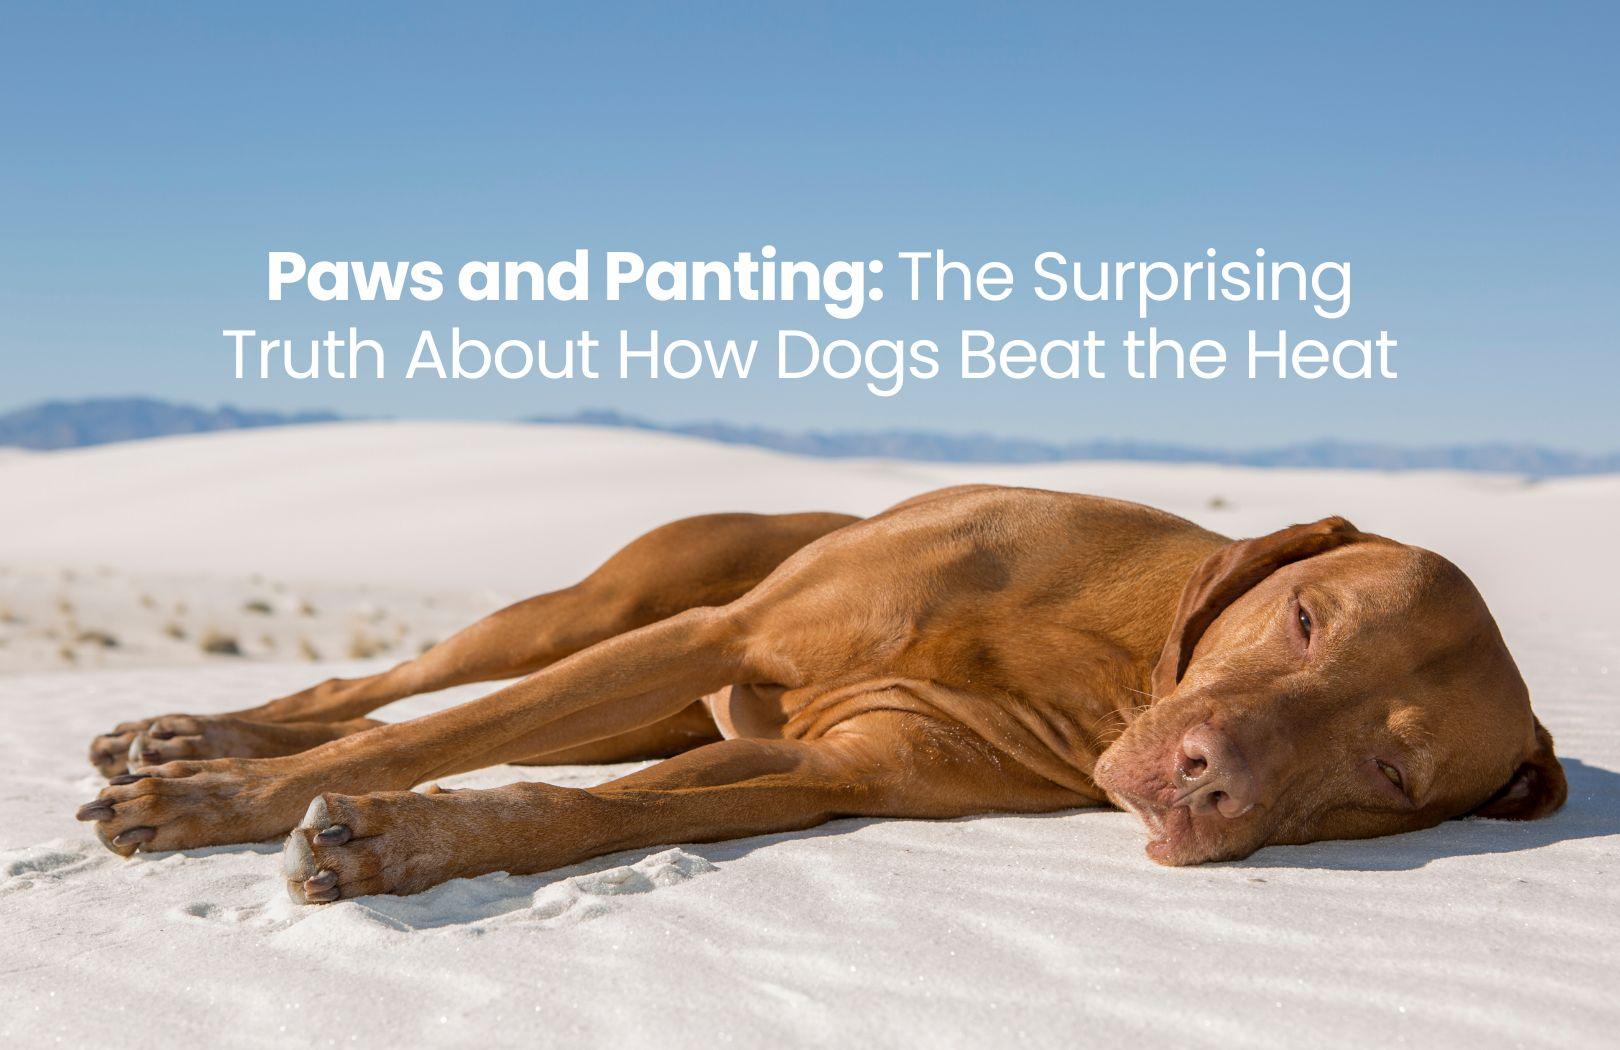 Paws and Panting: The Surprising Truth About How Dogs Beat the Heat